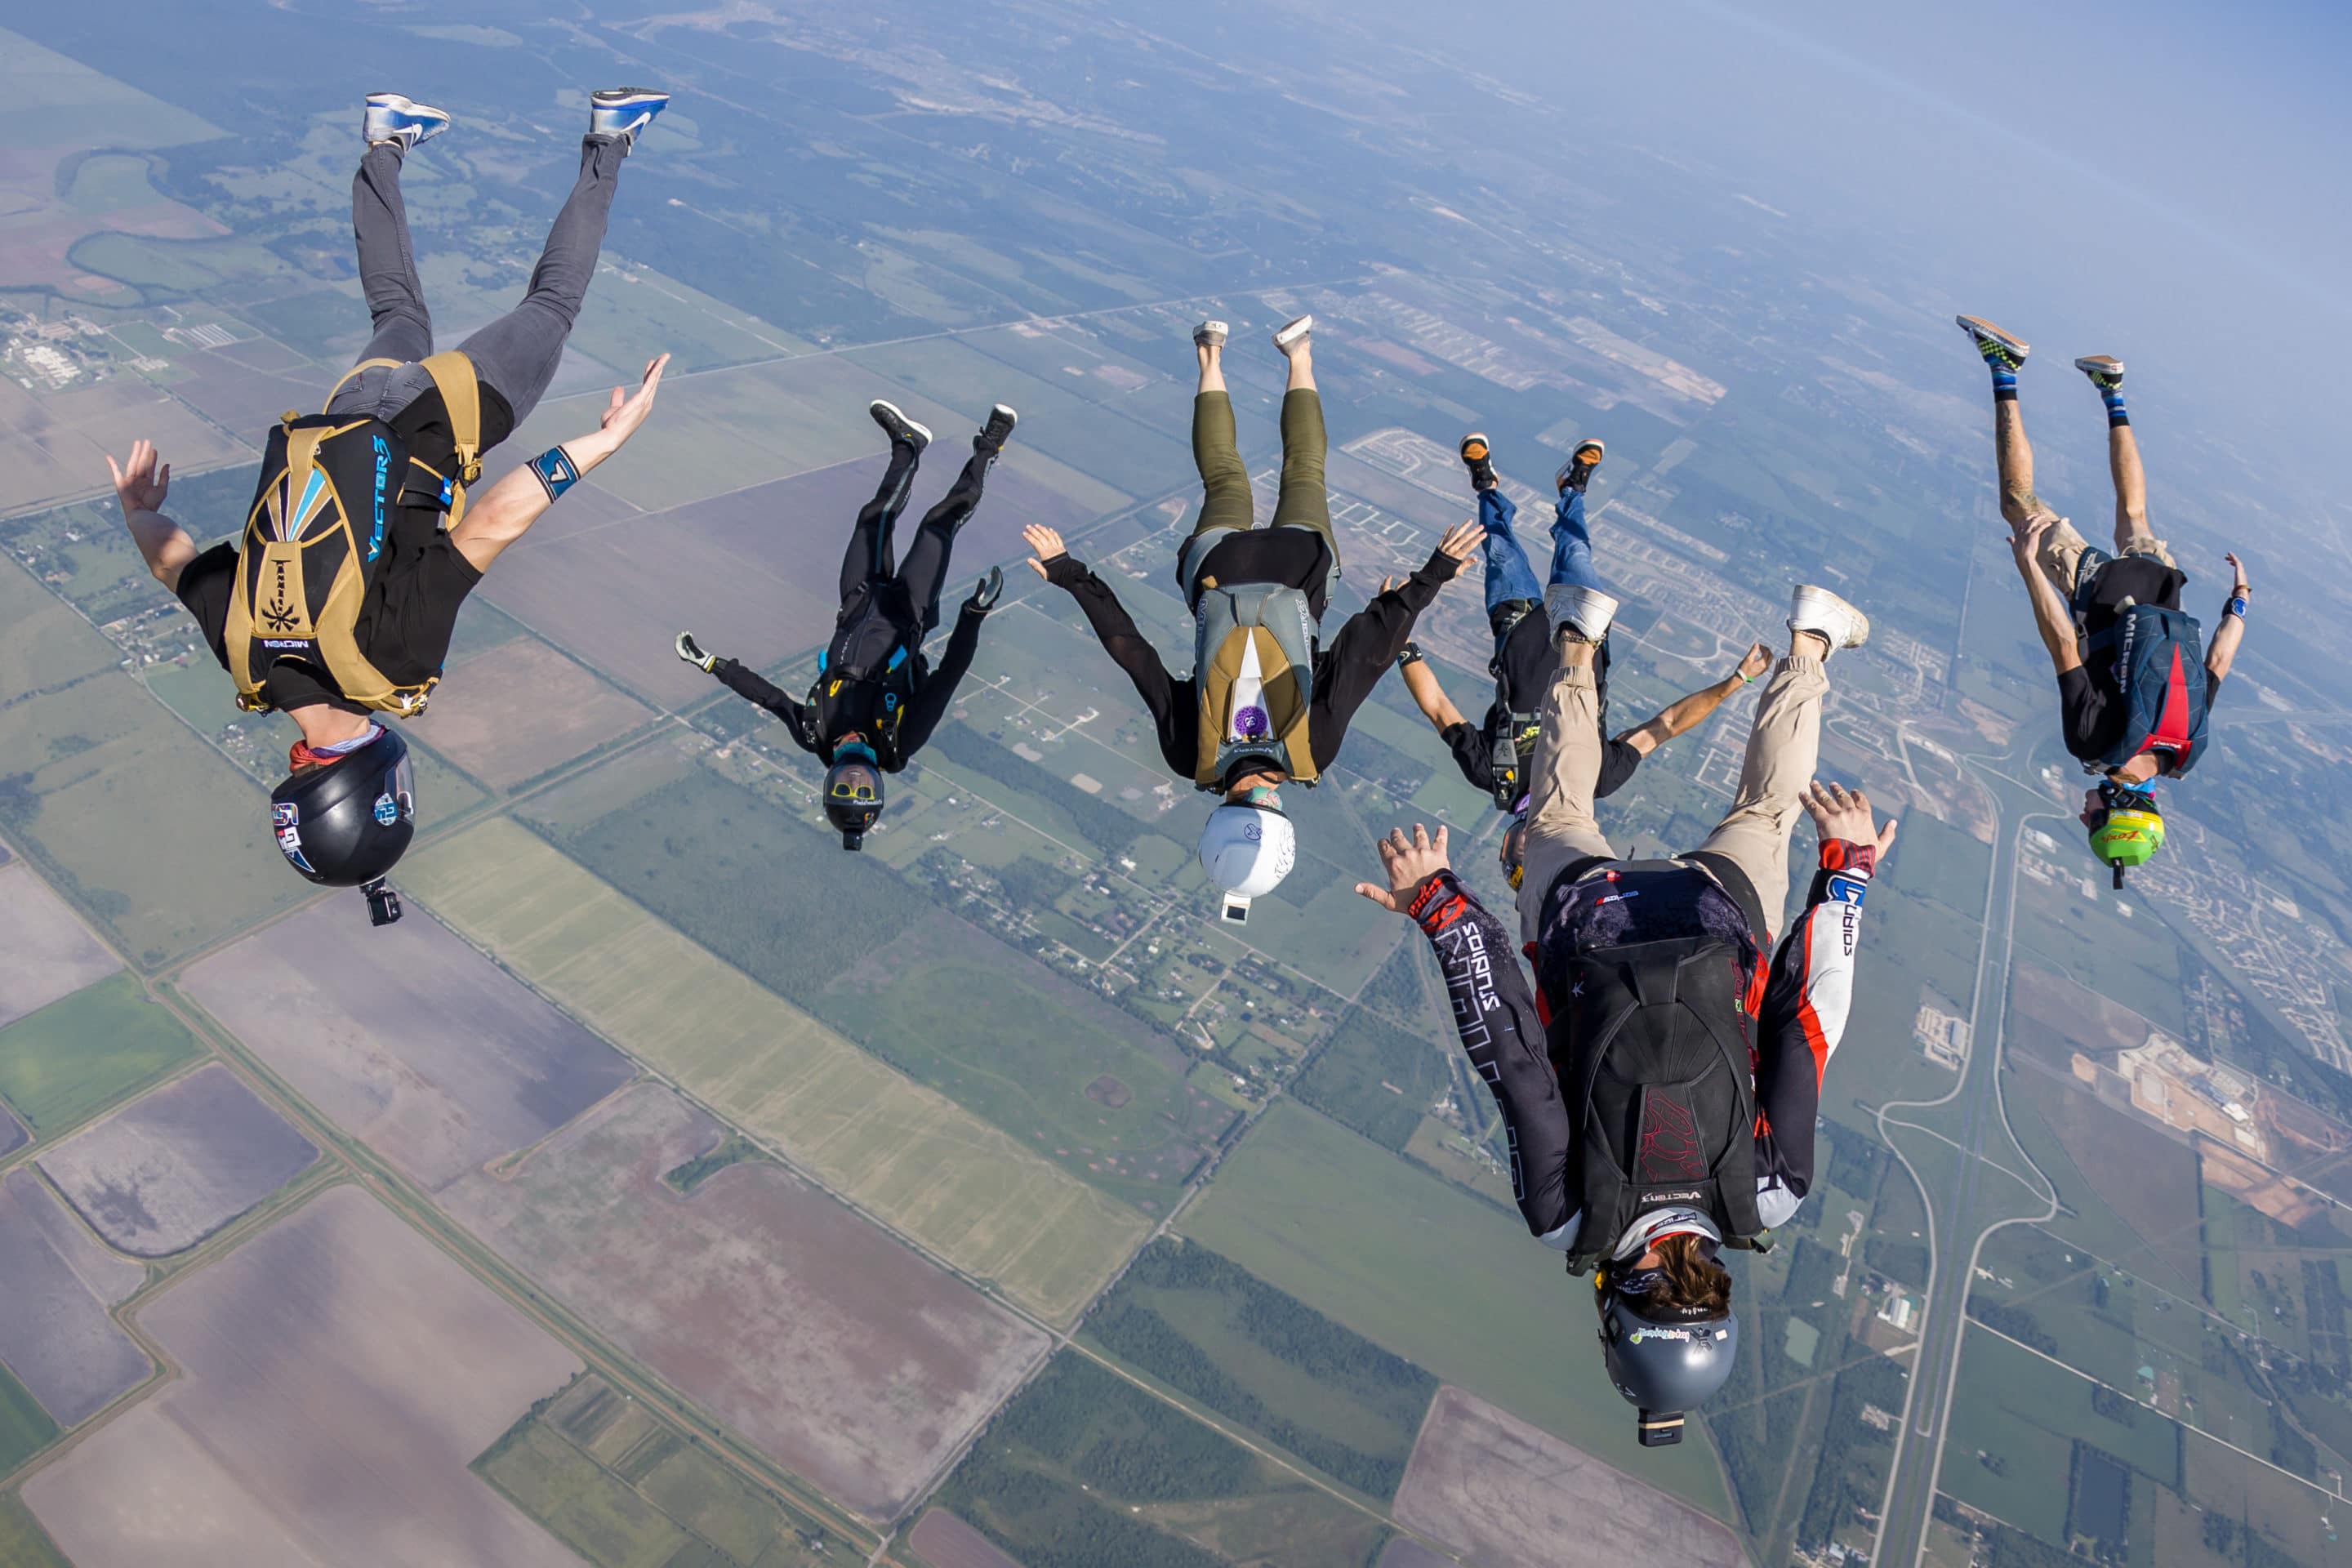 Skydiving Slovenia in Slovenia, Europe | Skydiving - Rated 1